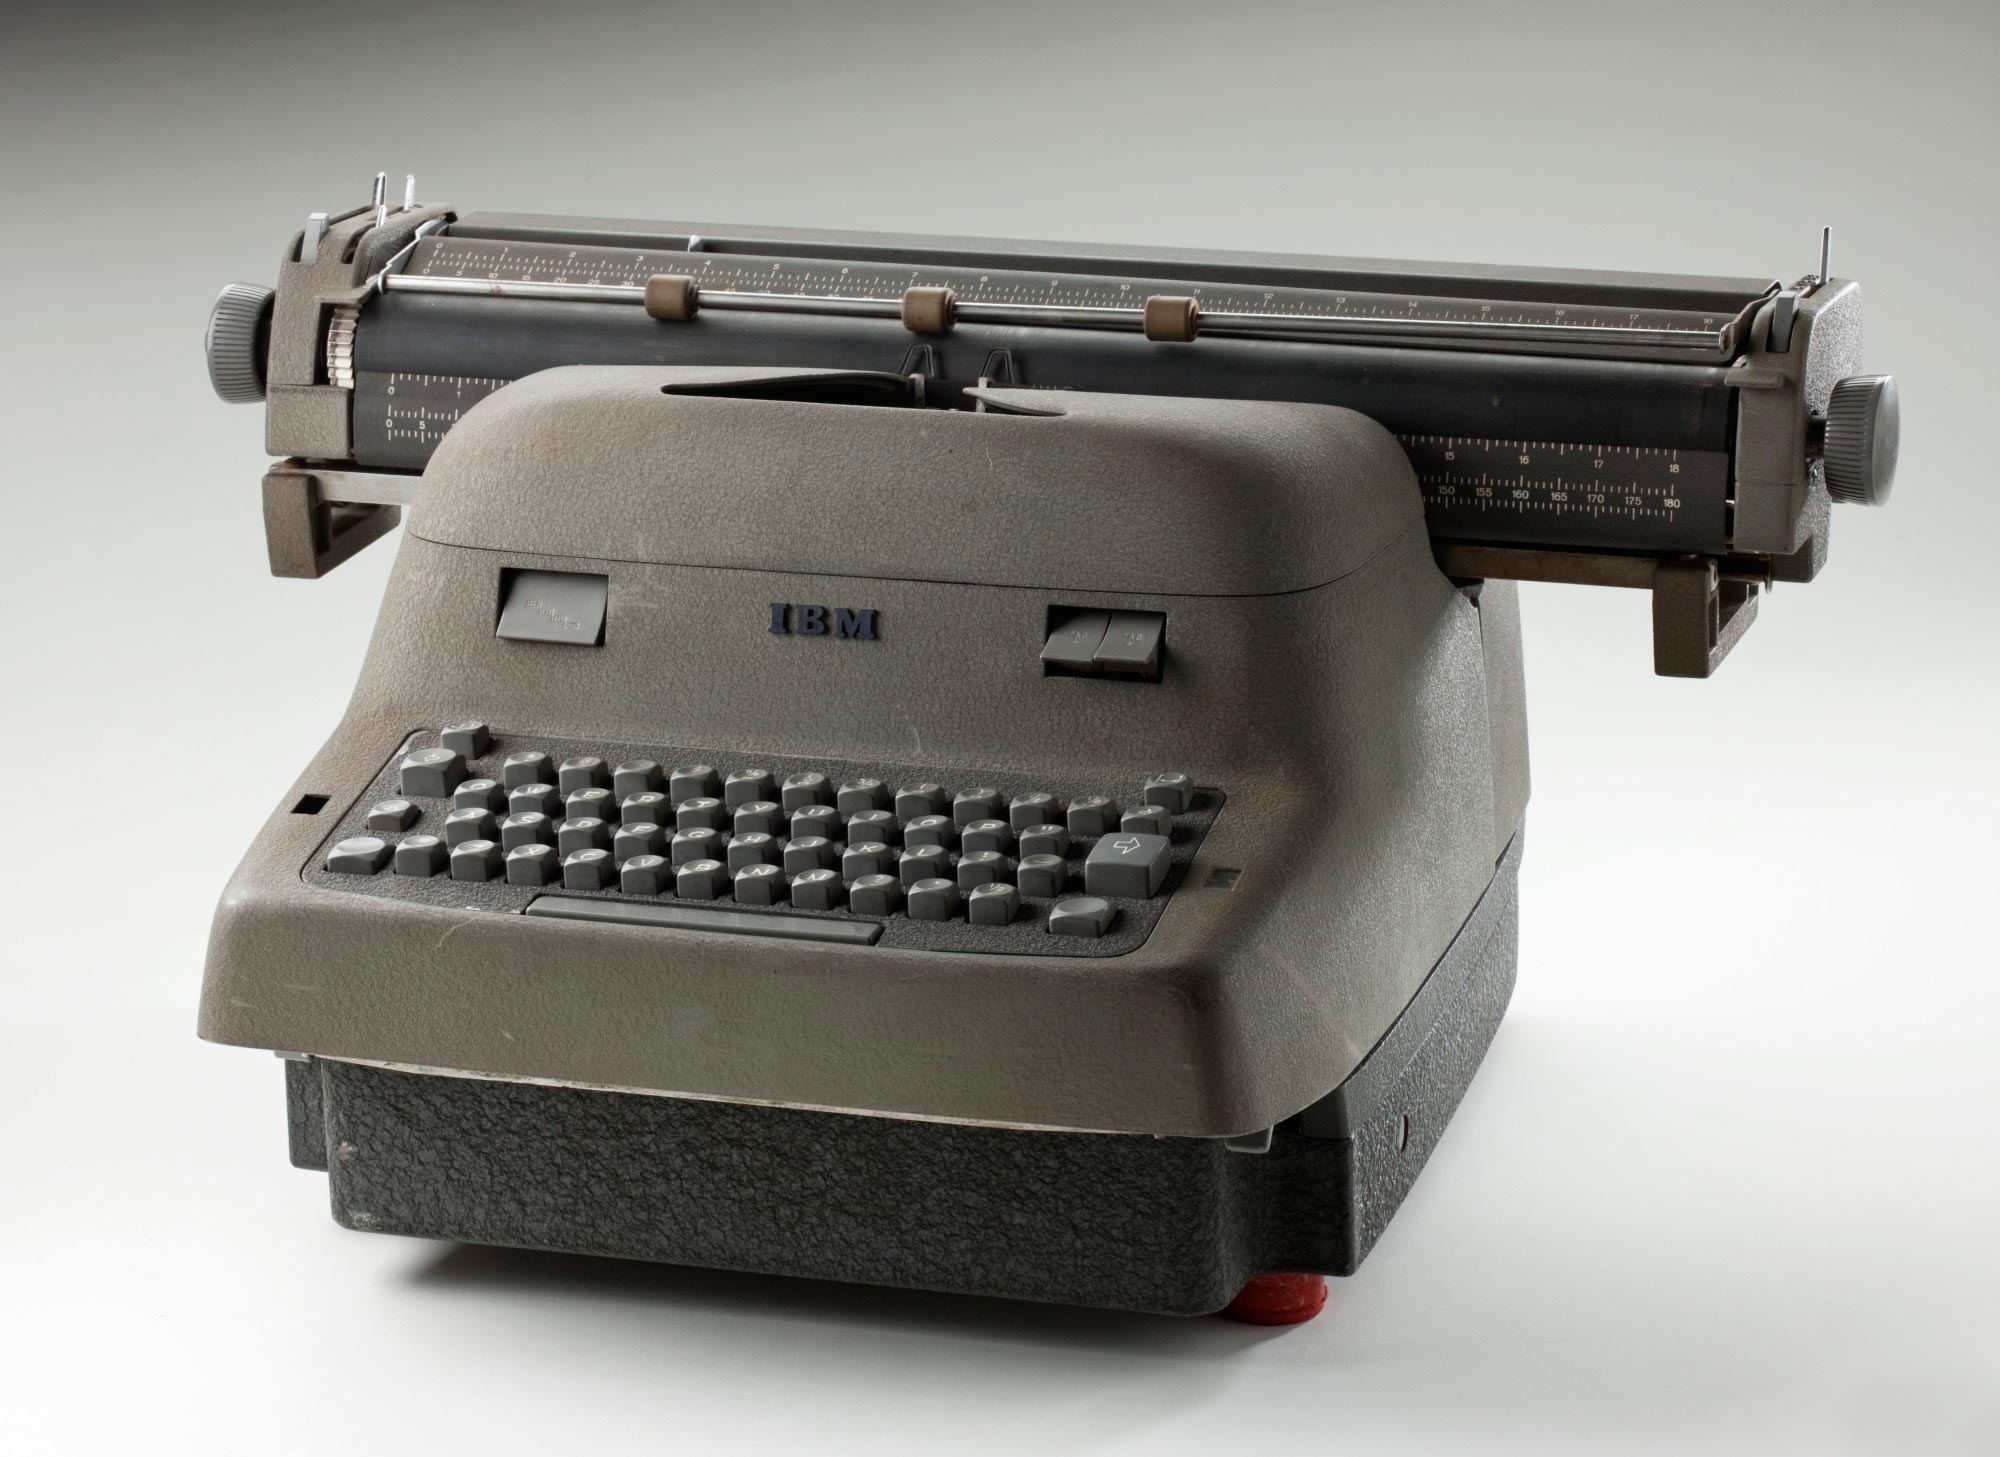 IBM input typewriter from the SNOCOM computer used by the Snowy Mountains Hydro-Electric Authority.